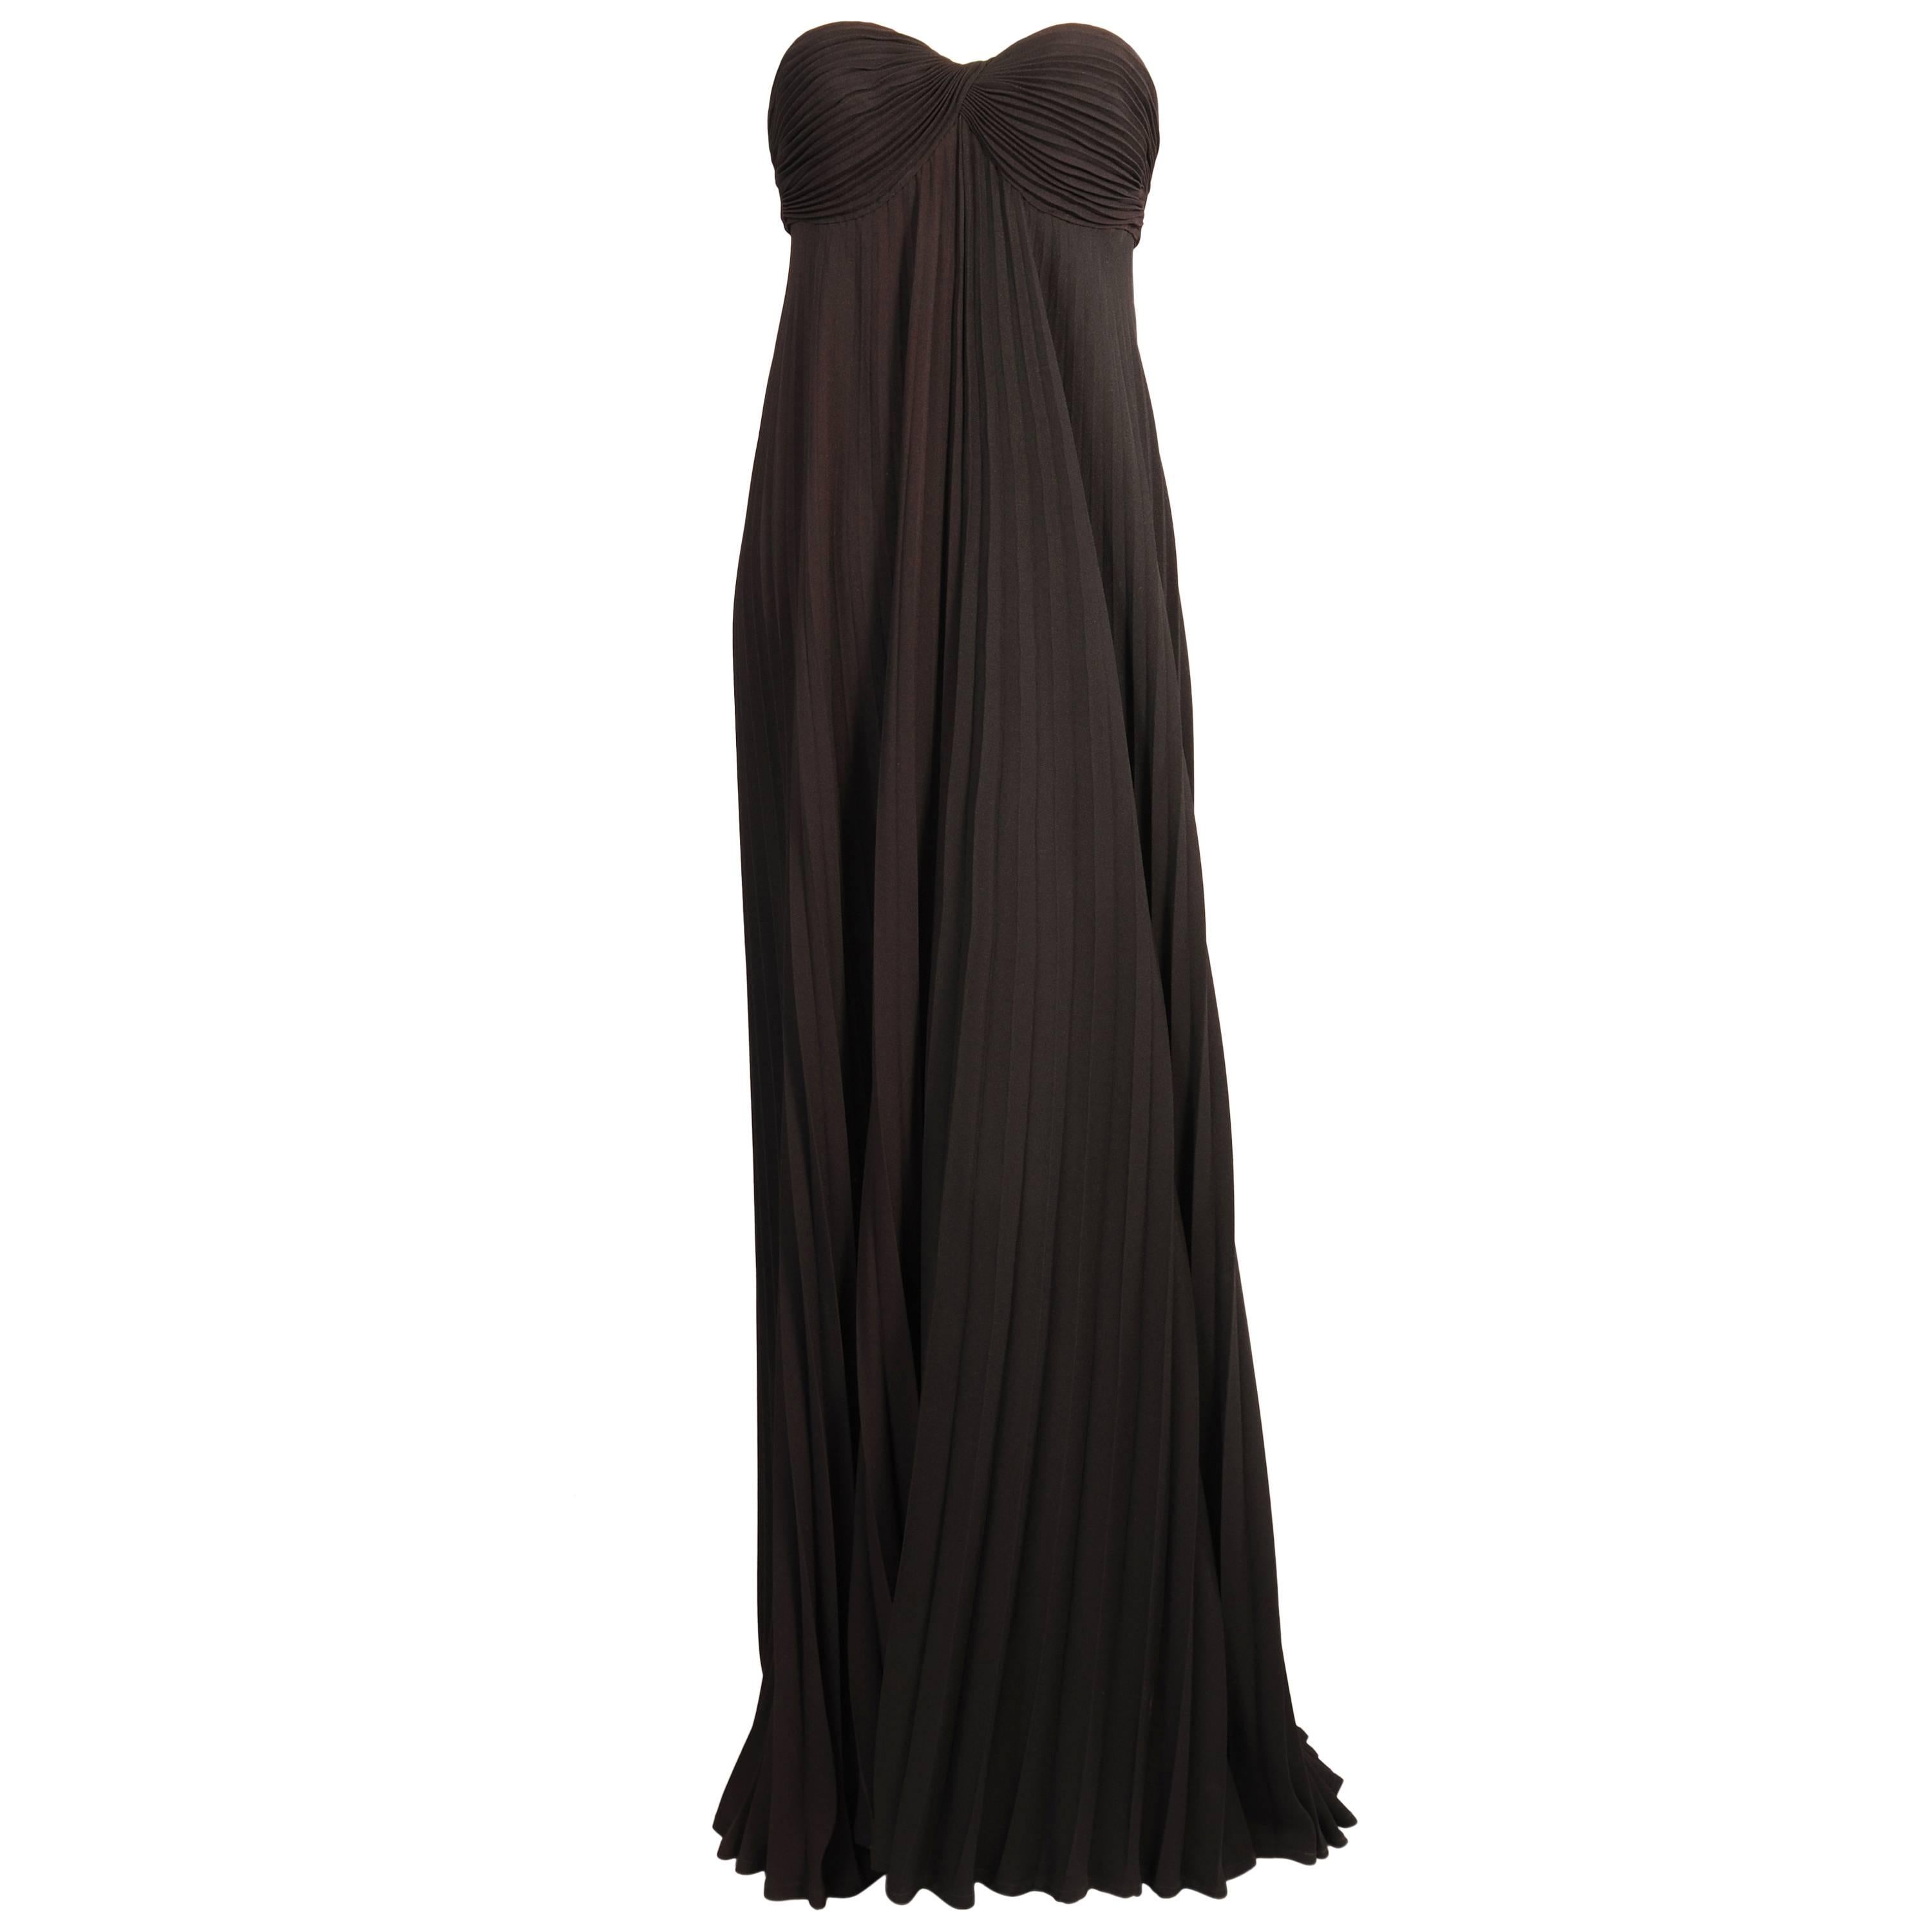 Loris Azzaro Strapless Brown and Black Pleated Evening Gown